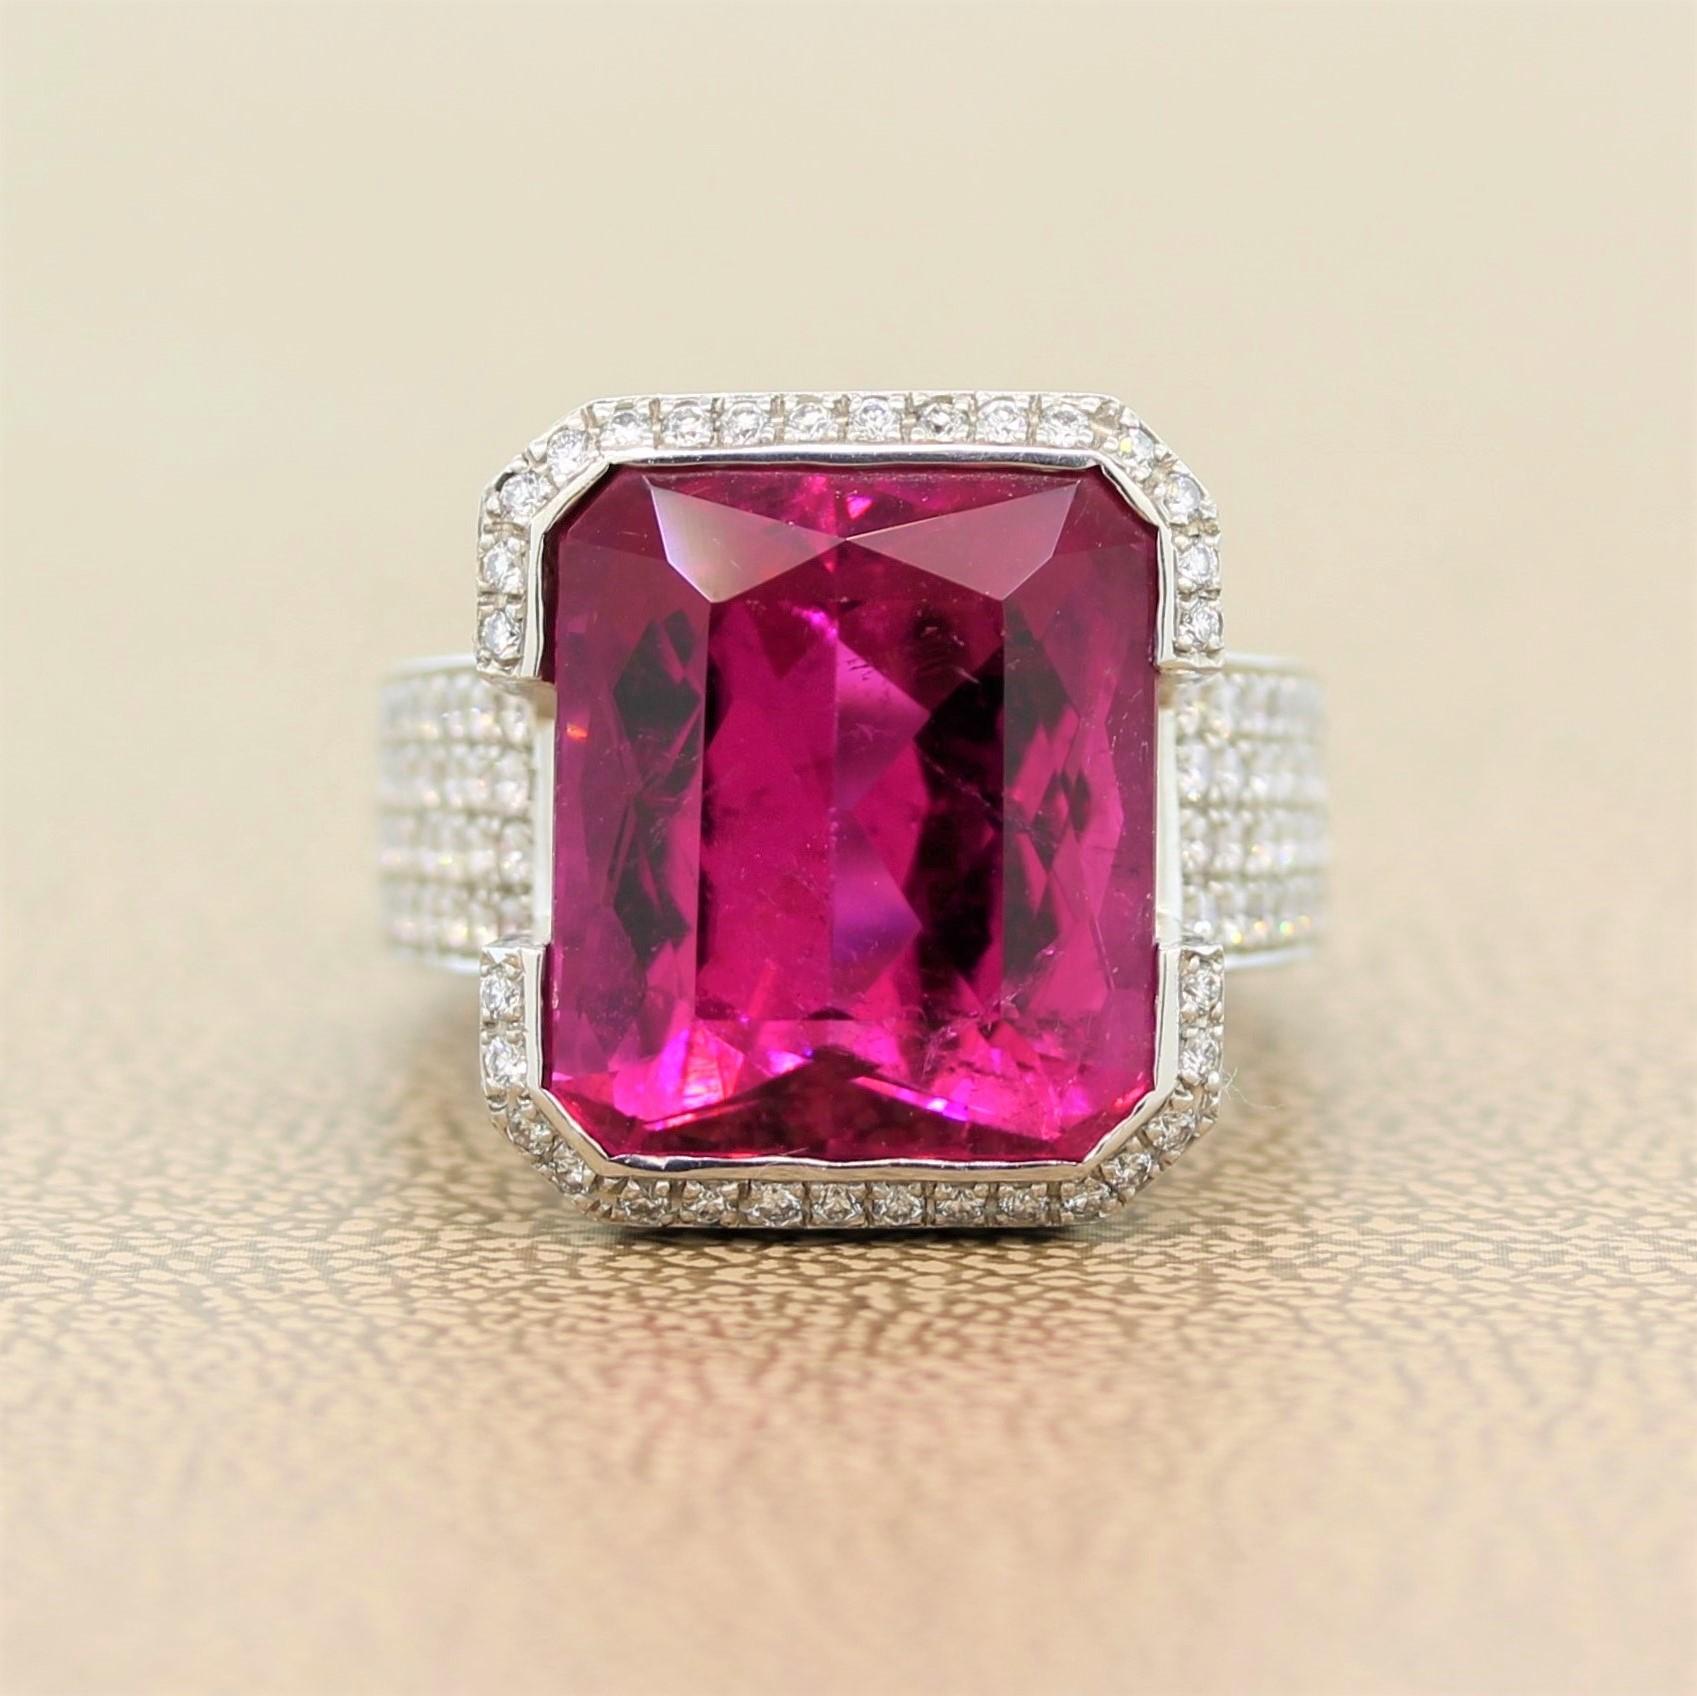 A remarkable ring featuring a 15.54 carat crimson tourmaline. The radiant cut tourmaline is set in a half bezel 18K white gold setting. The ring is accented by 0.70 carats of round cut colorless sparkling diamonds making this cocktail ring easily